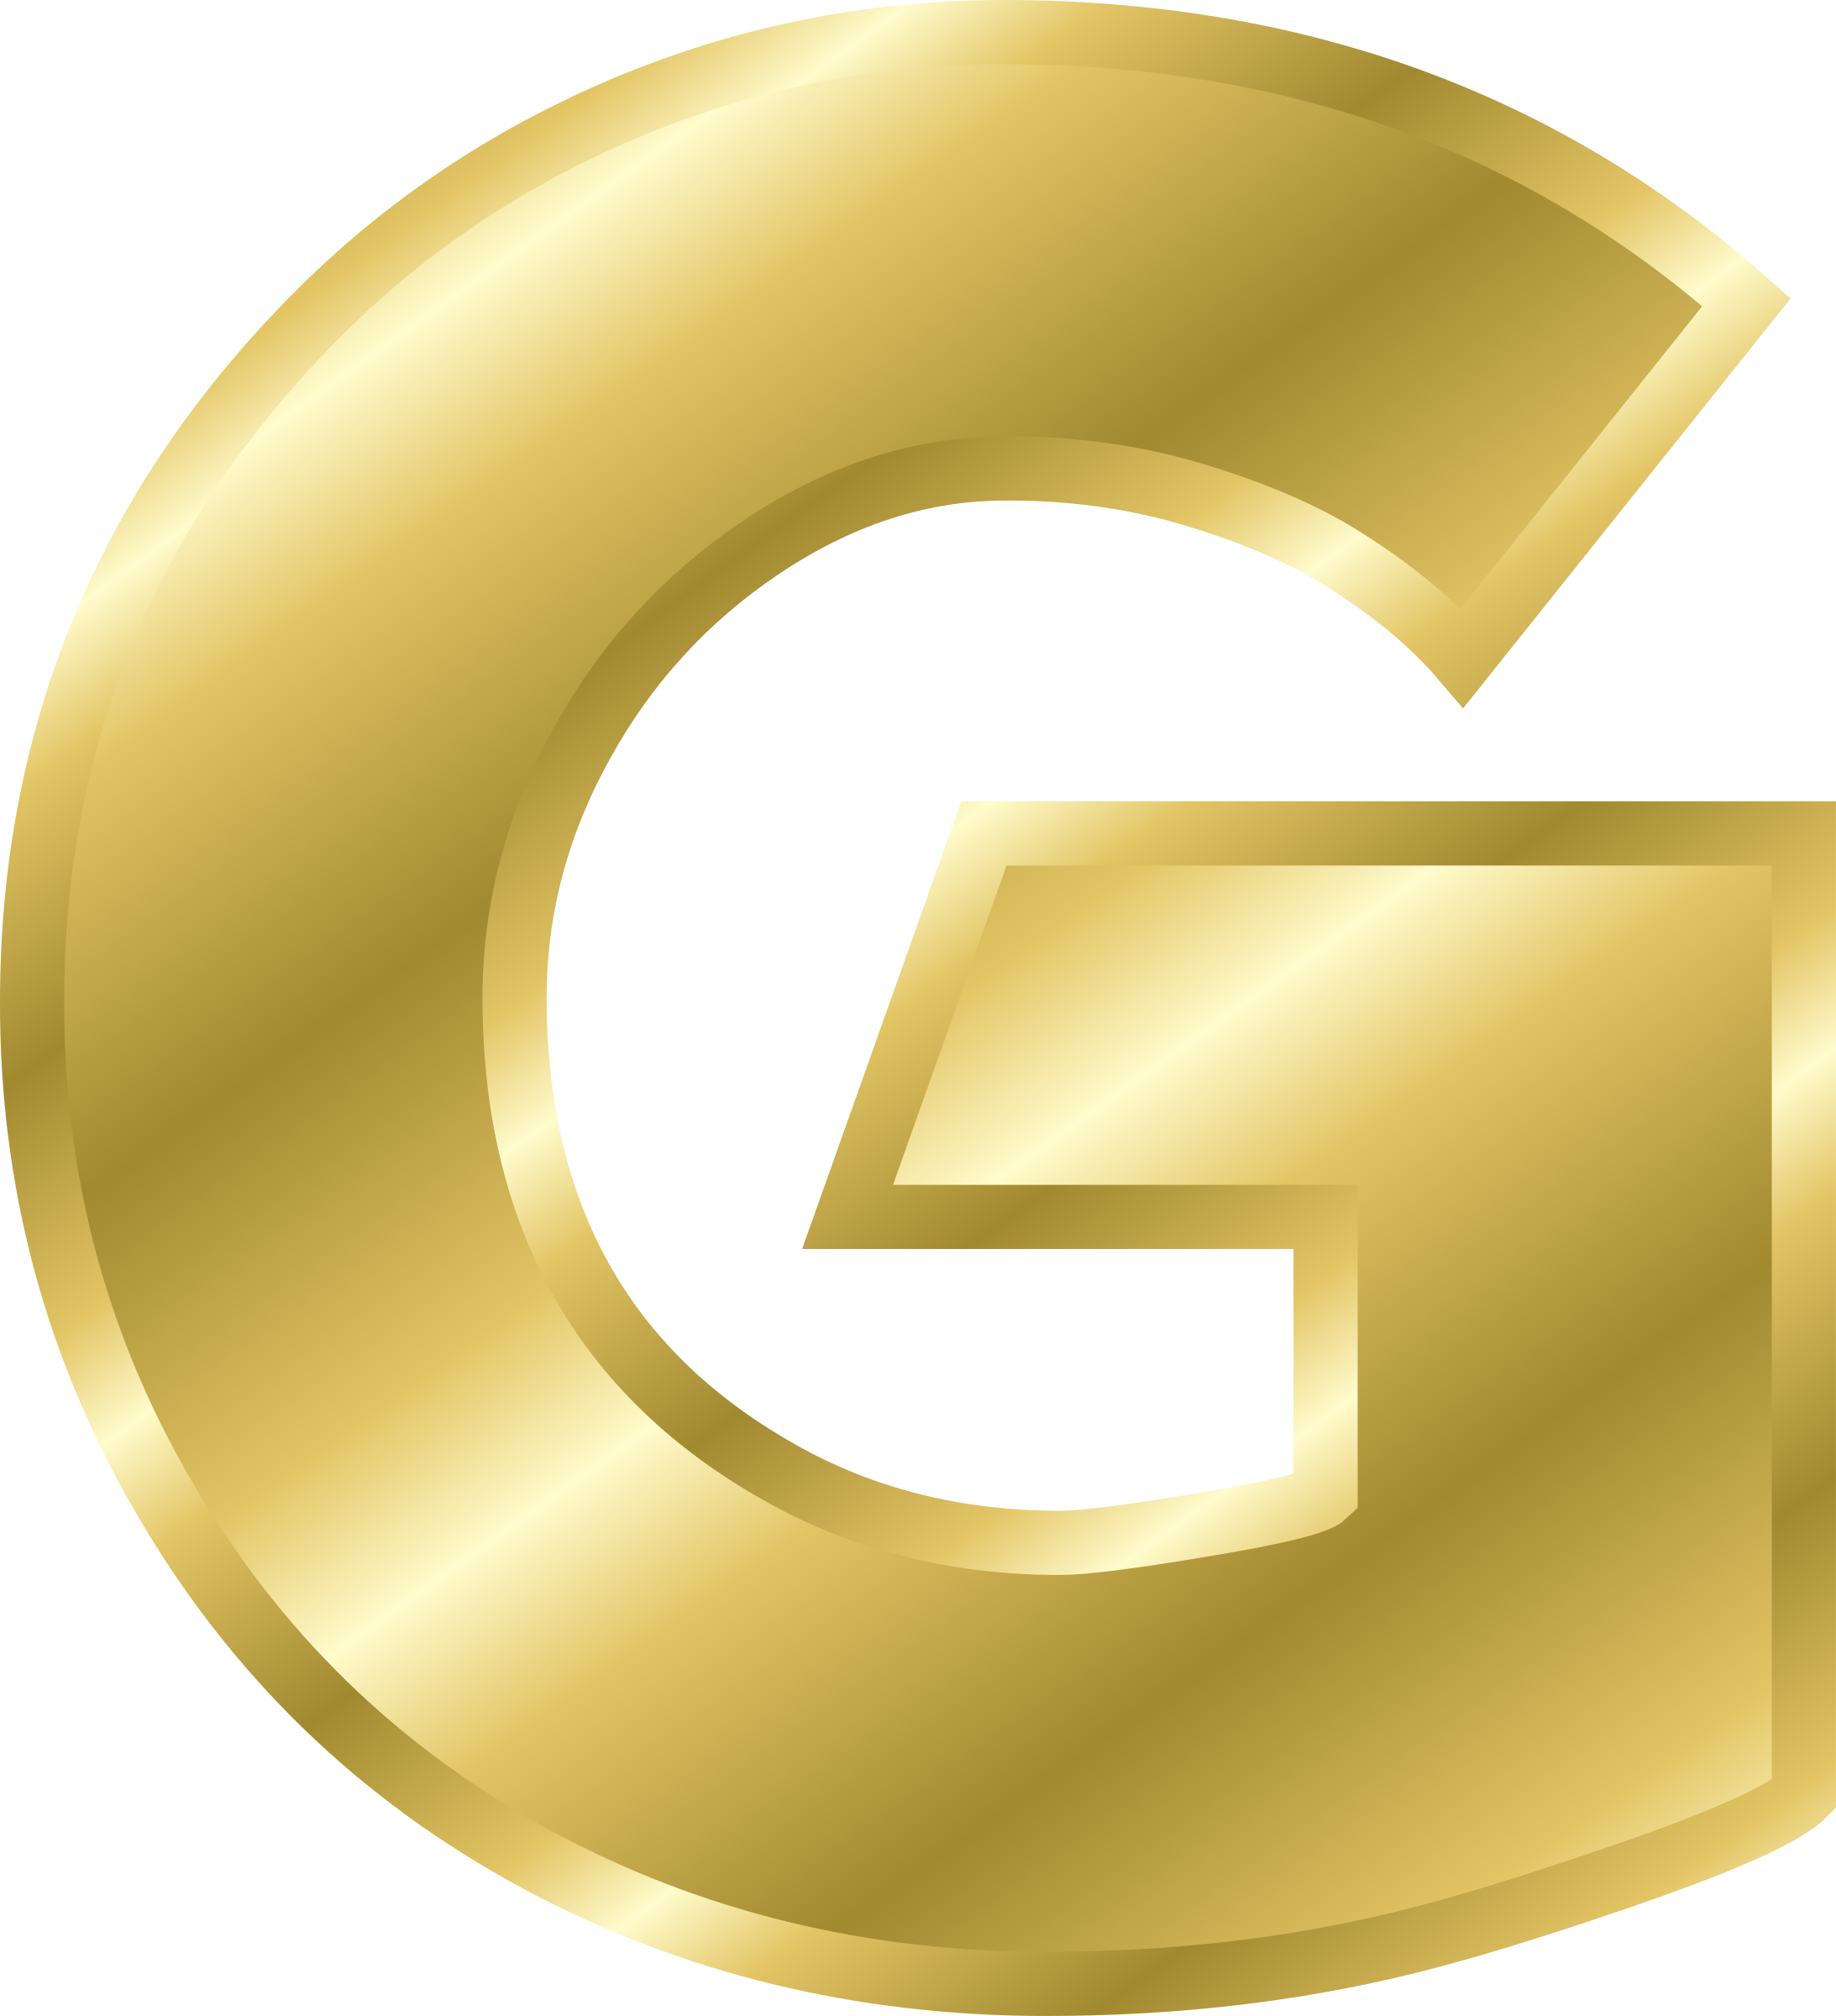 G Letter Png Image Hd Png All